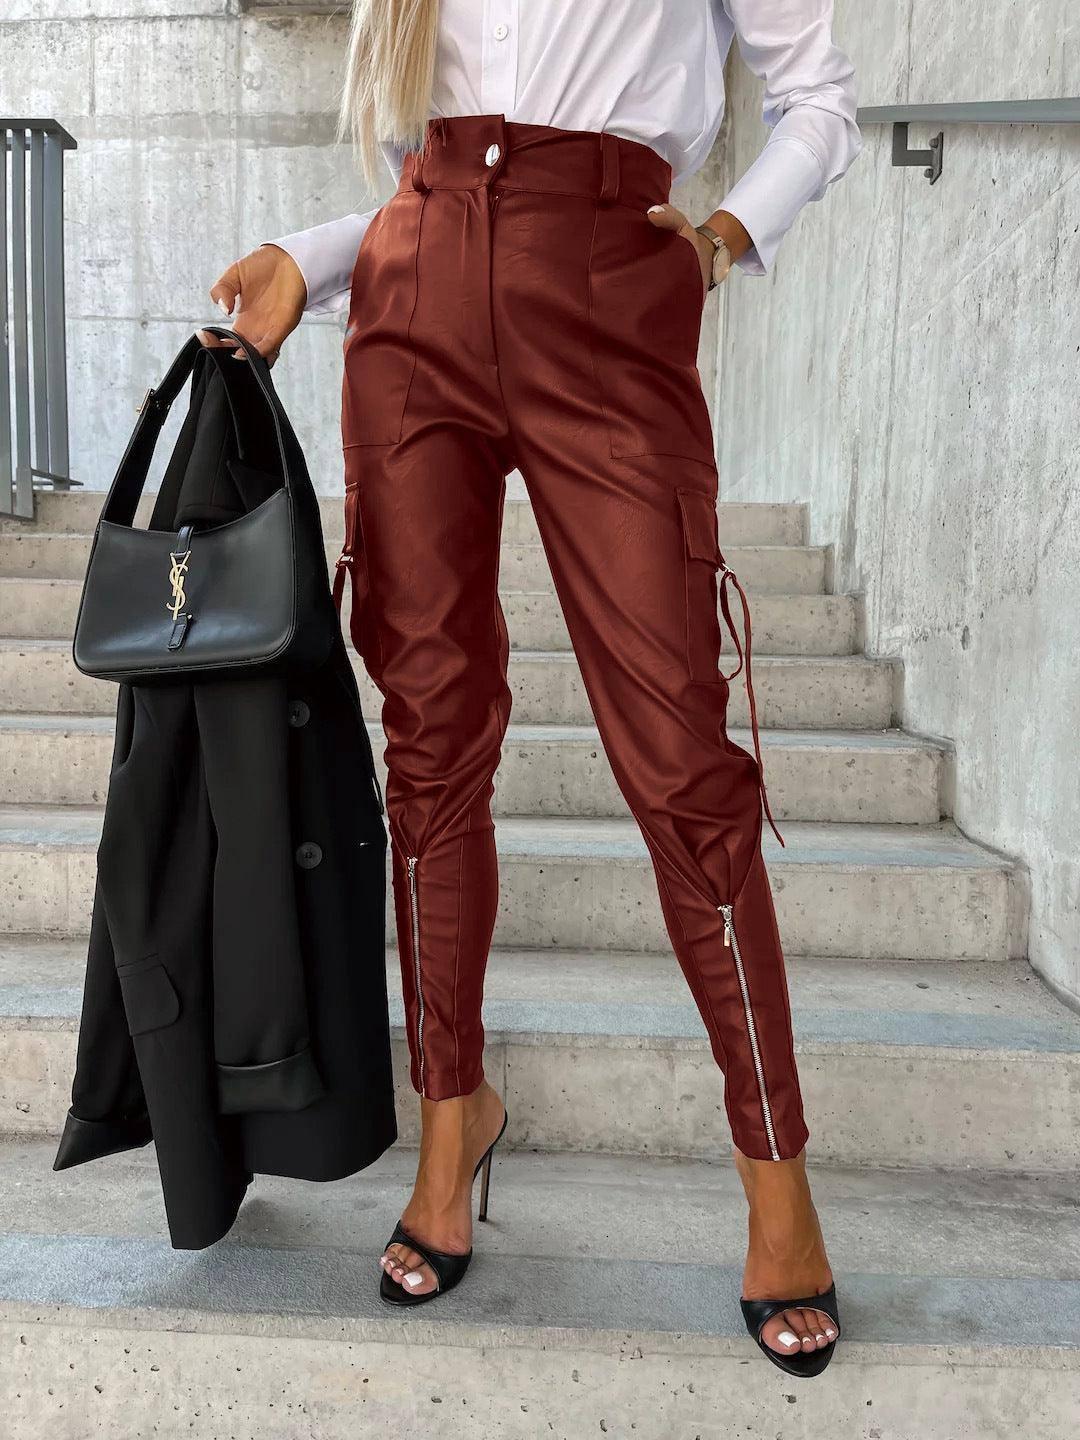 Fashion Slim-fitting Leather Trousers Women Waist-cinching-Red Brown-2